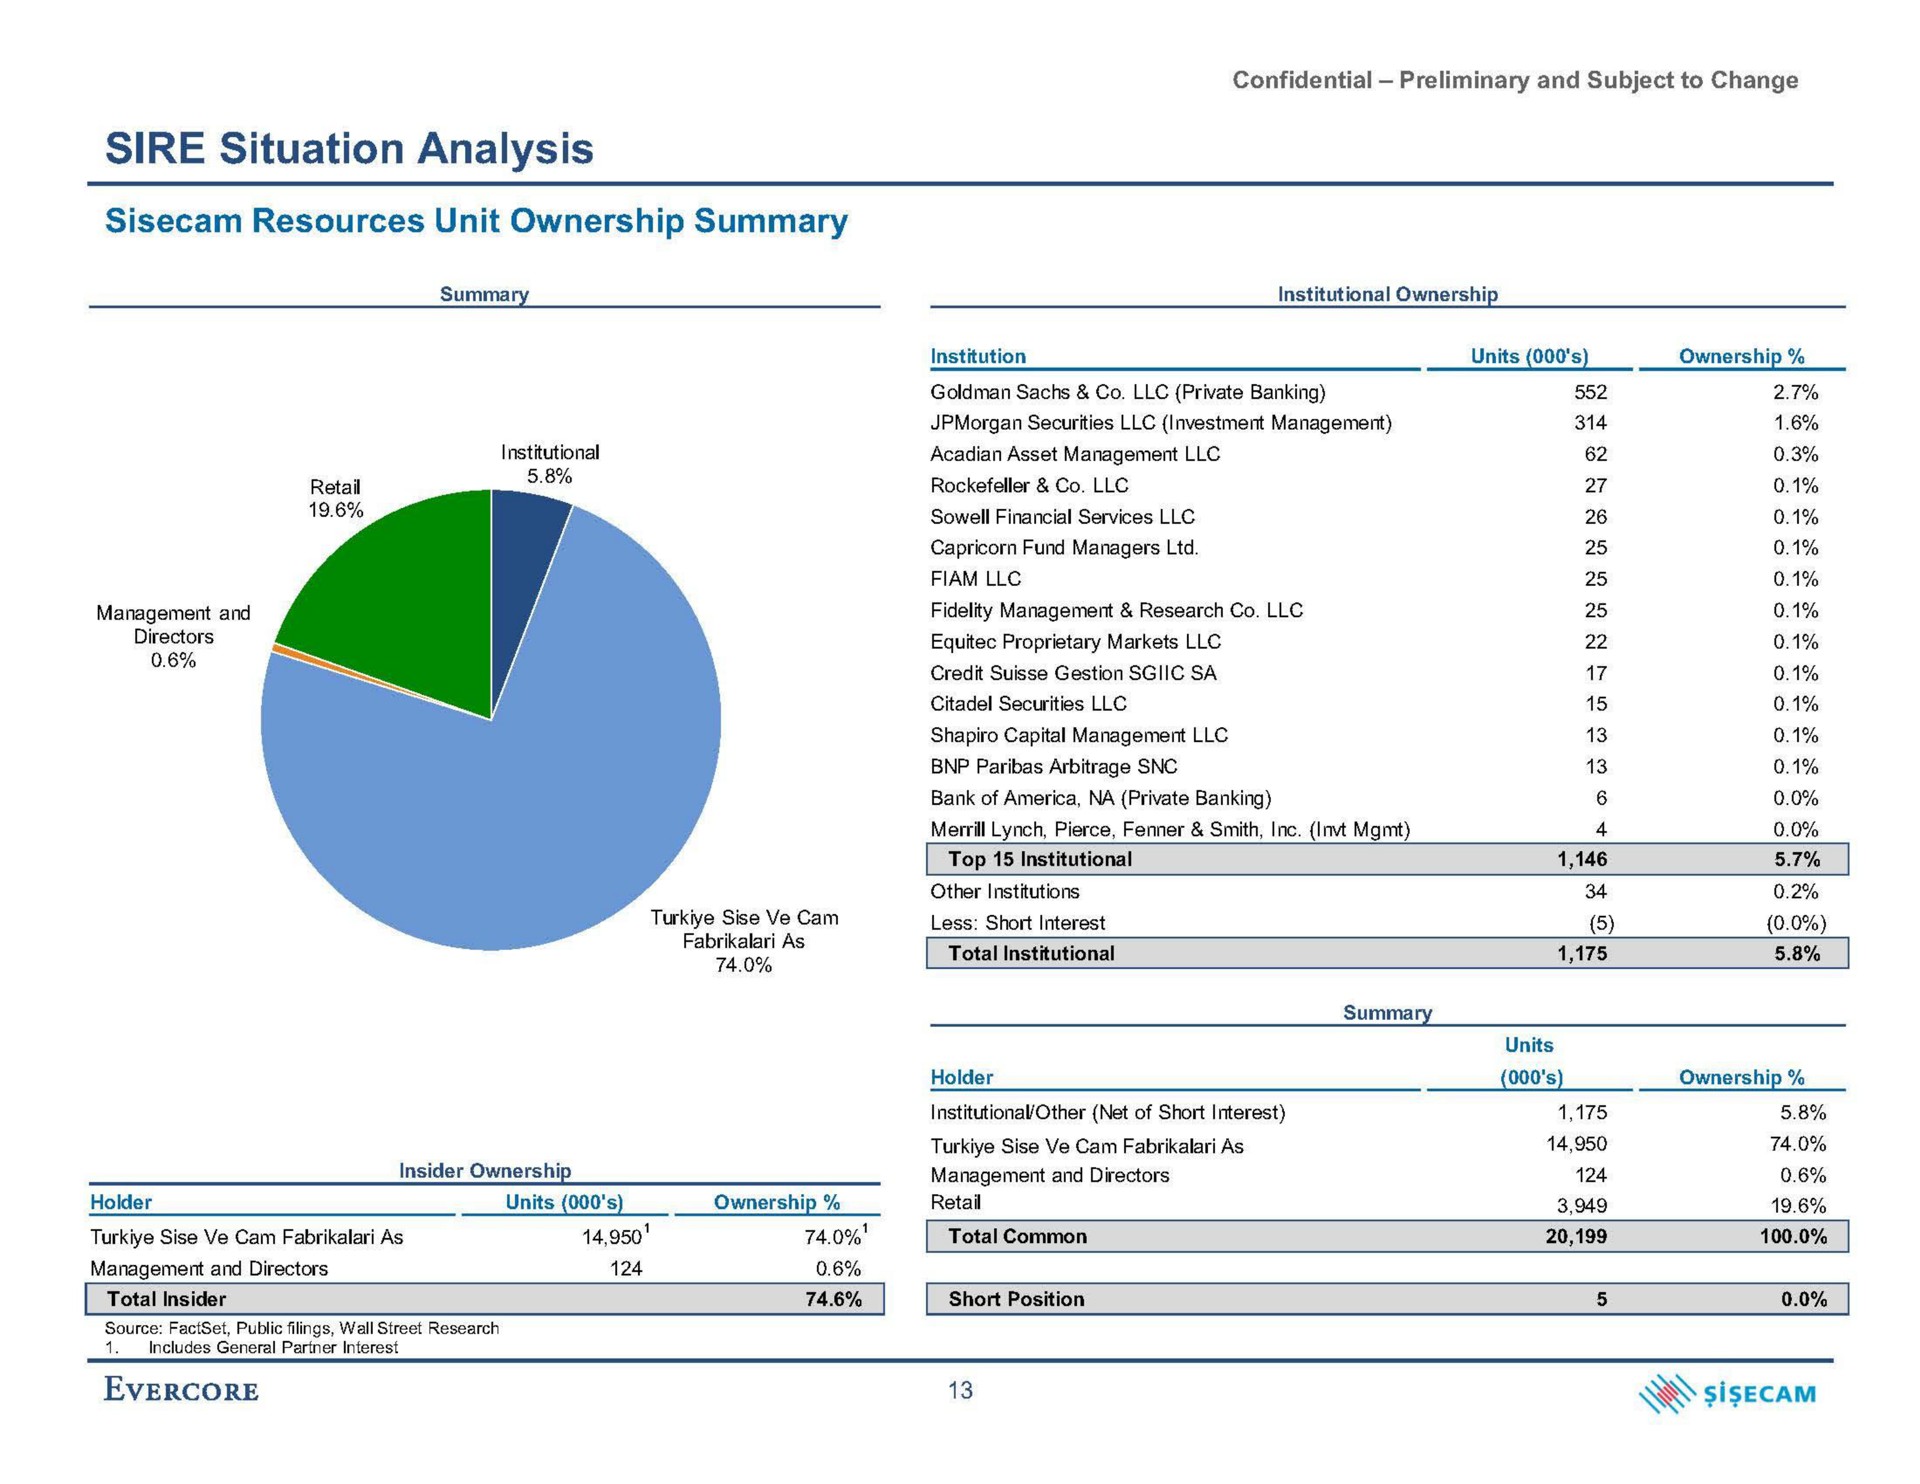 sire situation analysis resources unit ownership summary as total institutional | Evercore